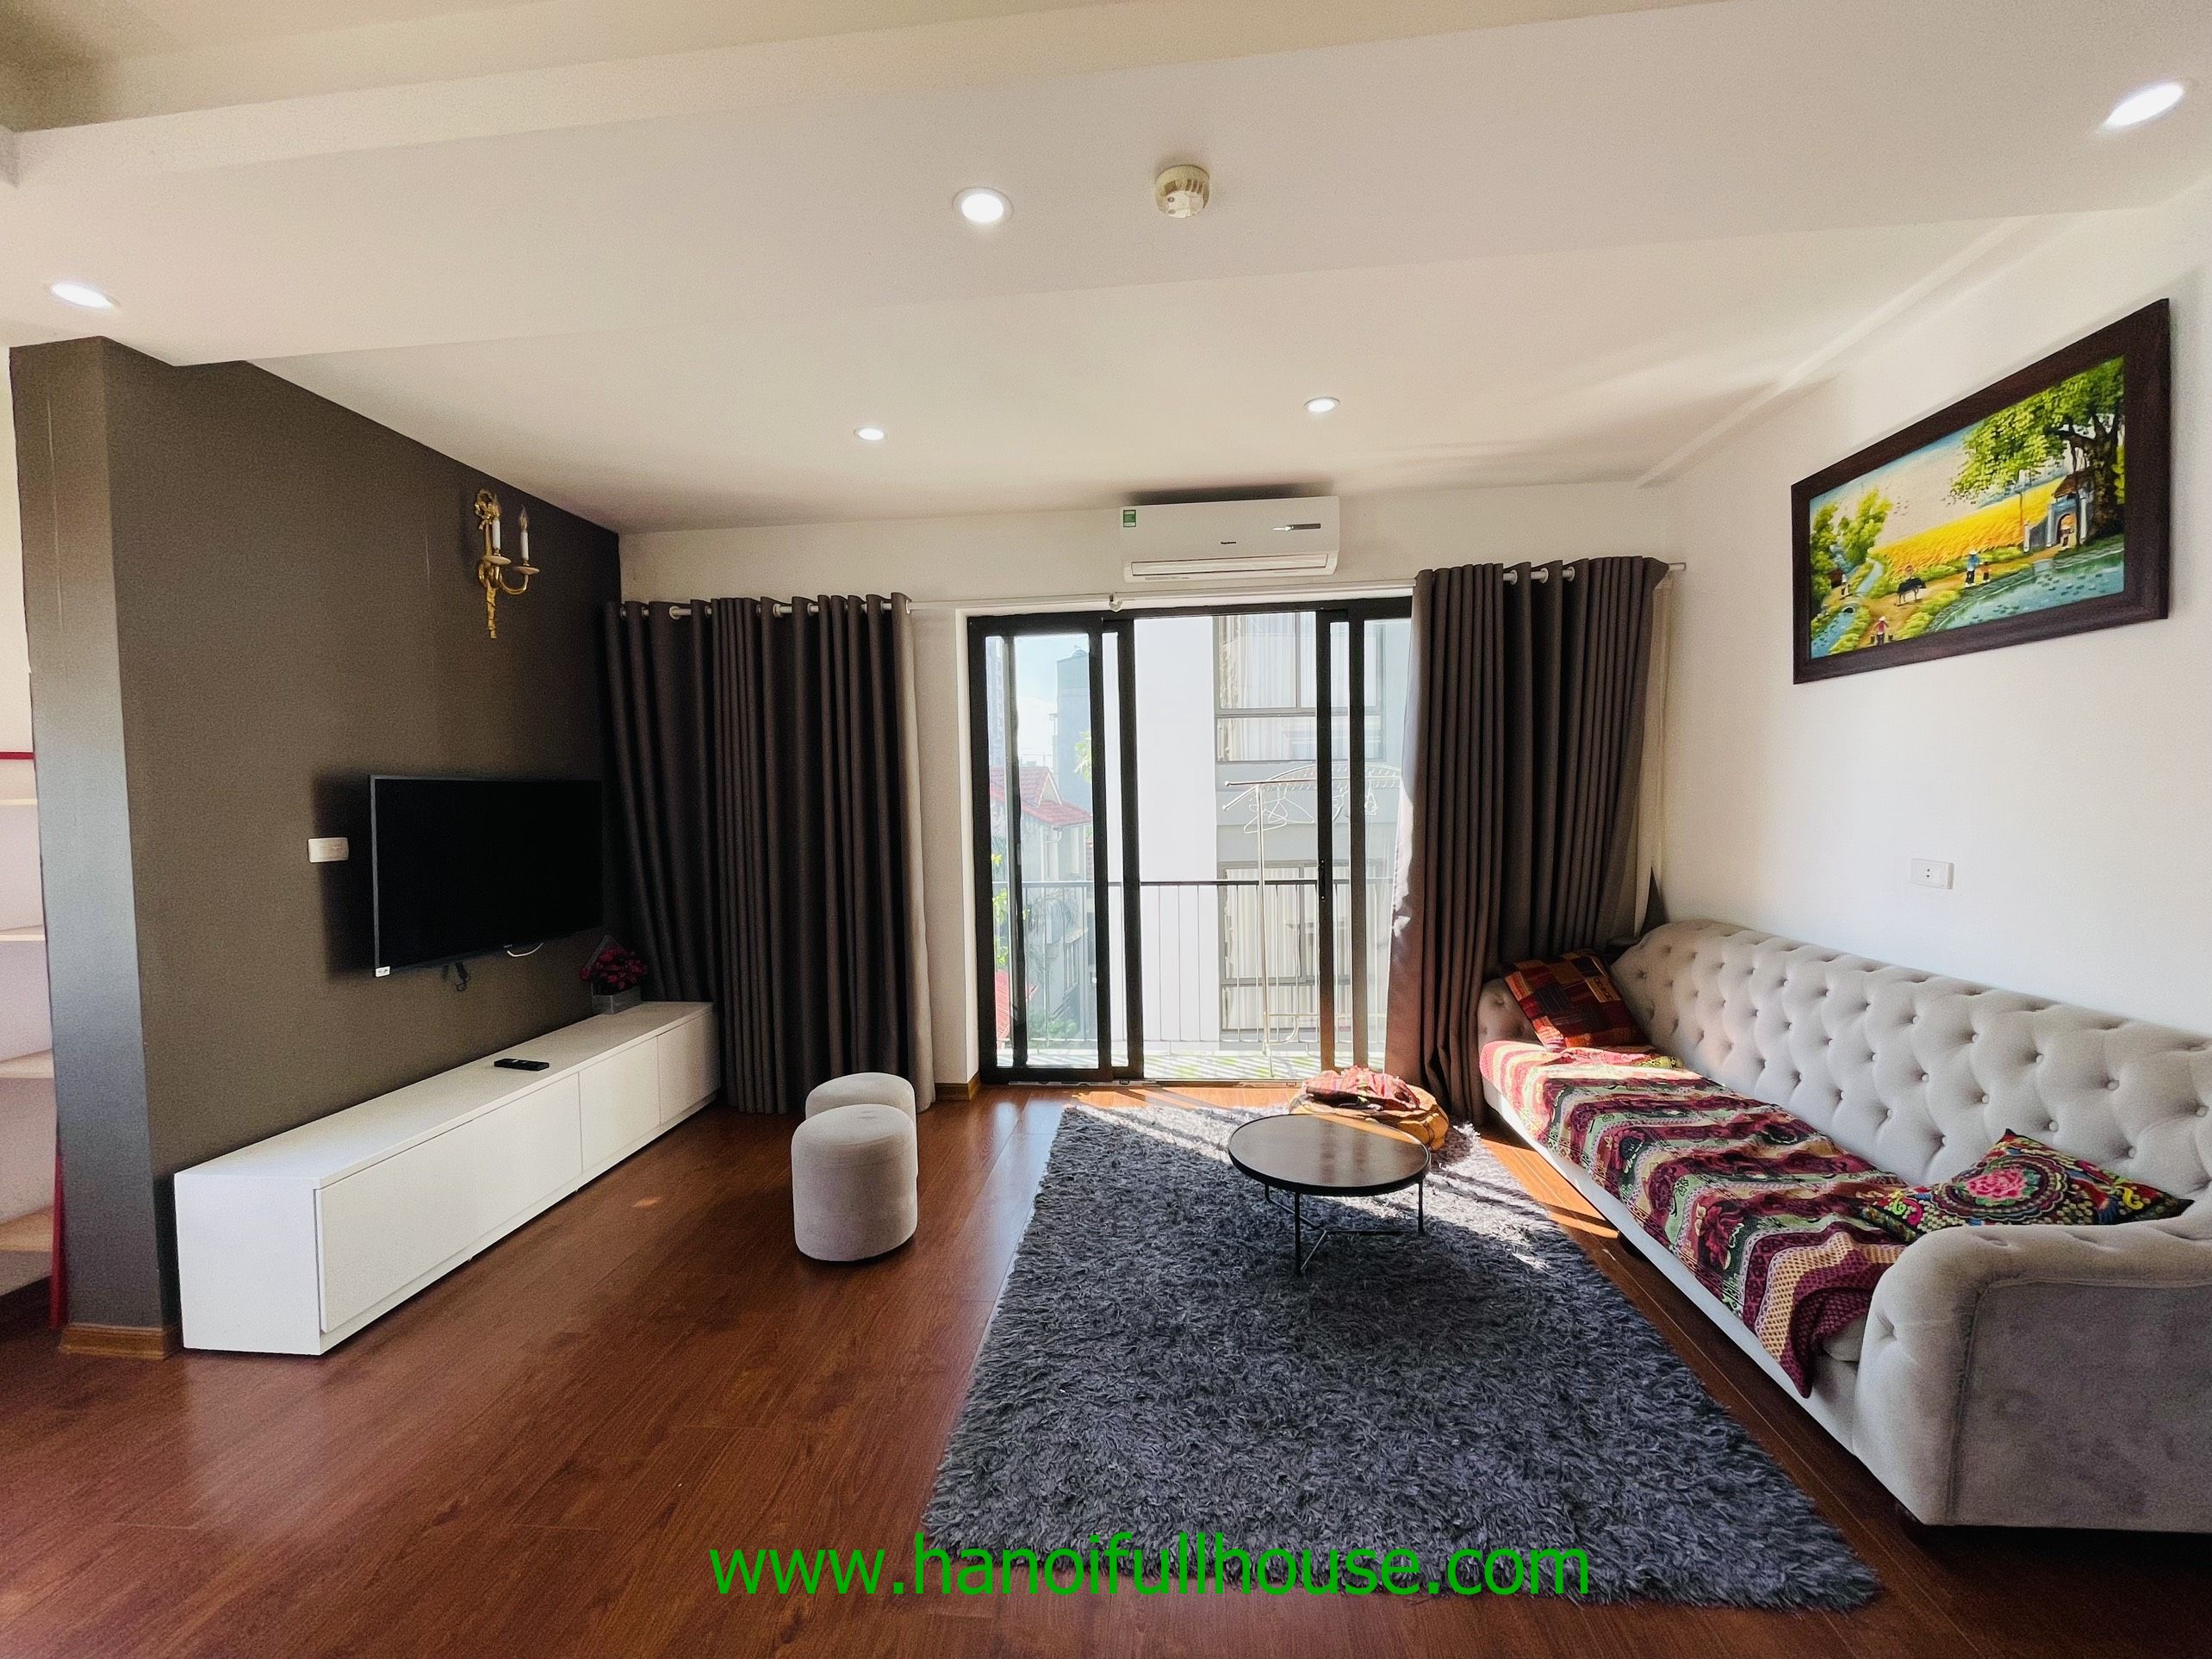 Let to rent serviced apartment with 2 bedrooms in West lake